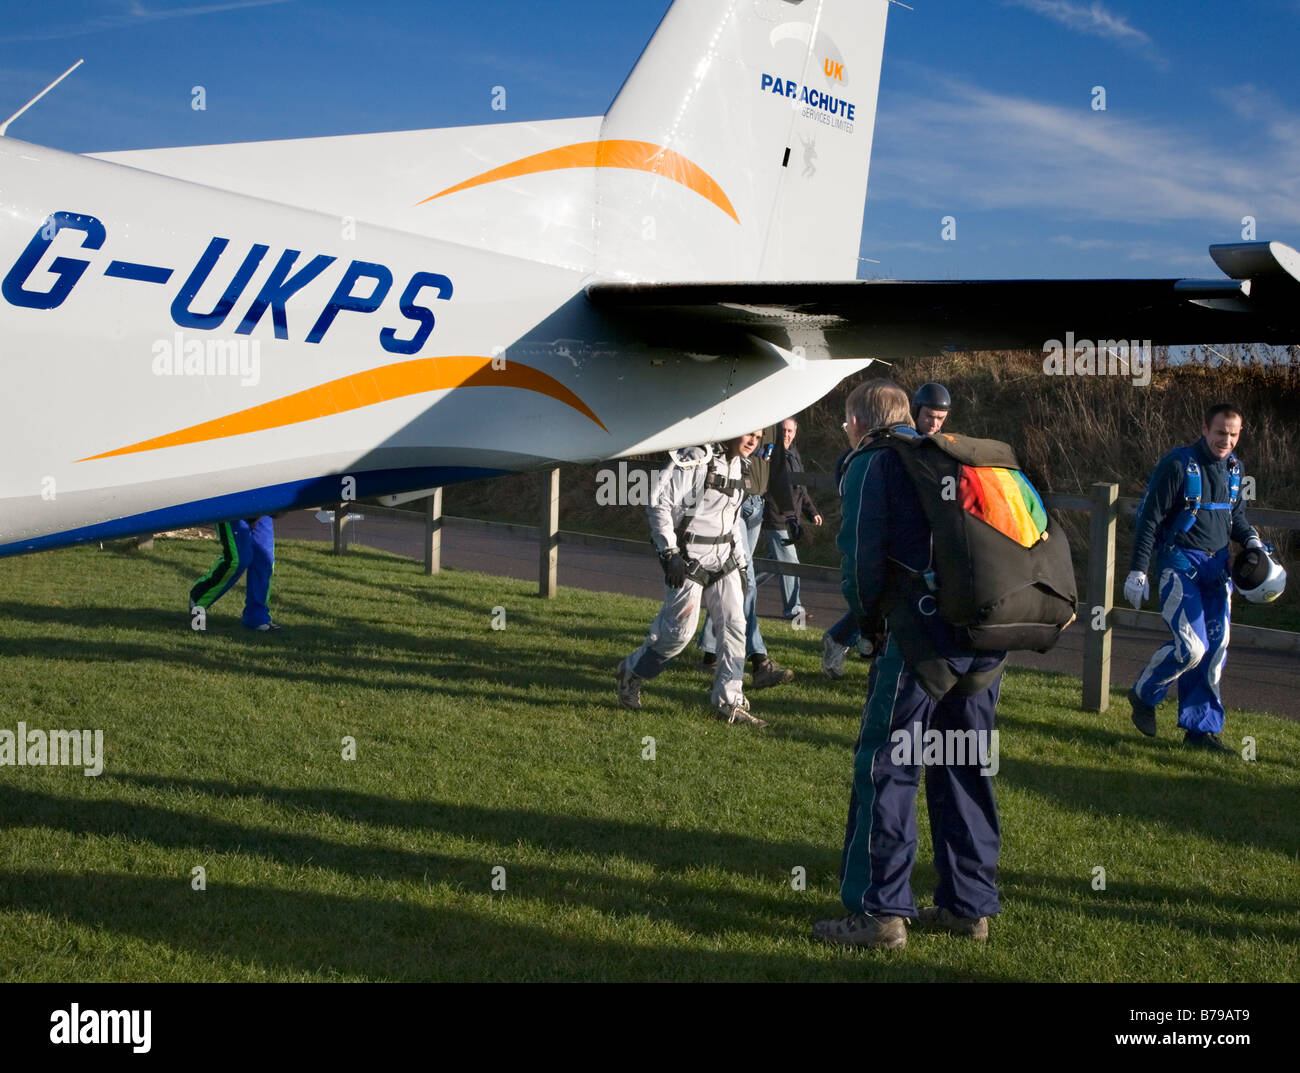 Cessna Caravan turbine aircraft USED TO CARRY SKYDIVERS. THE PARACHUTISTS GET READY TO BOARD THE AIRCRAFT Stock Photo